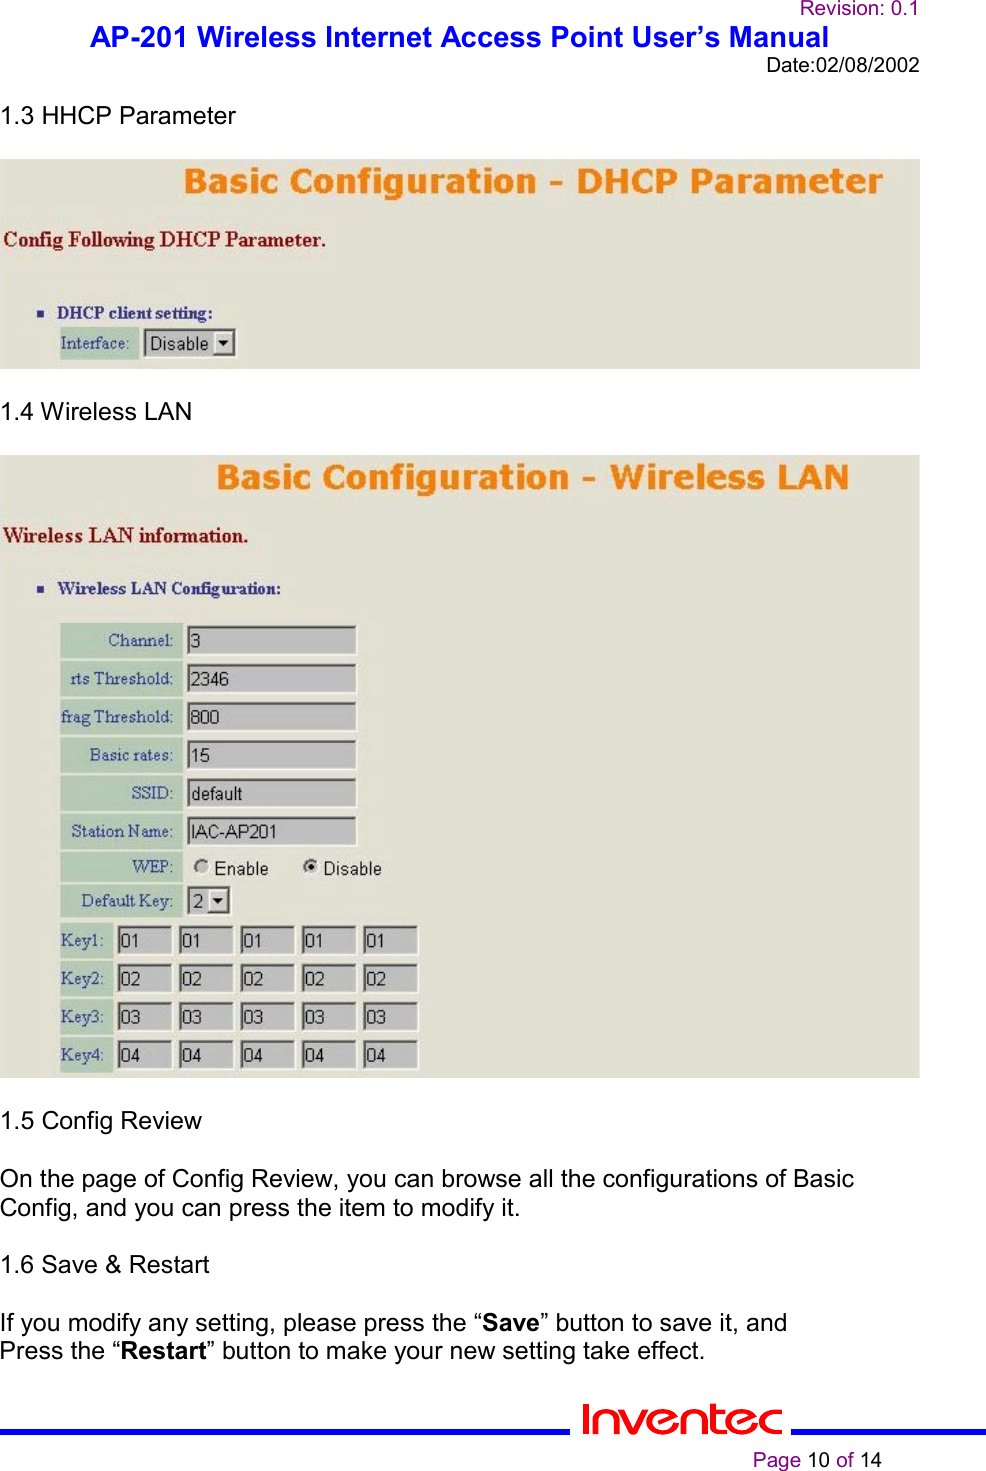 Revision: 0.1AP-201 Wireless Internet Access Point User’s ManualDate:02/08/2002                                                                                                                                                    Page 10 of 141.3 HHCP Parameter1.4 Wireless LAN1.5 Config ReviewOn the page of Config Review, you can browse all the configurations of BasicConfig, and you can press the item to modify it.1.6 Save &amp; RestartIf you modify any setting, please press the “Save” button to save it, andPress the “Restart” button to make your new setting take effect.